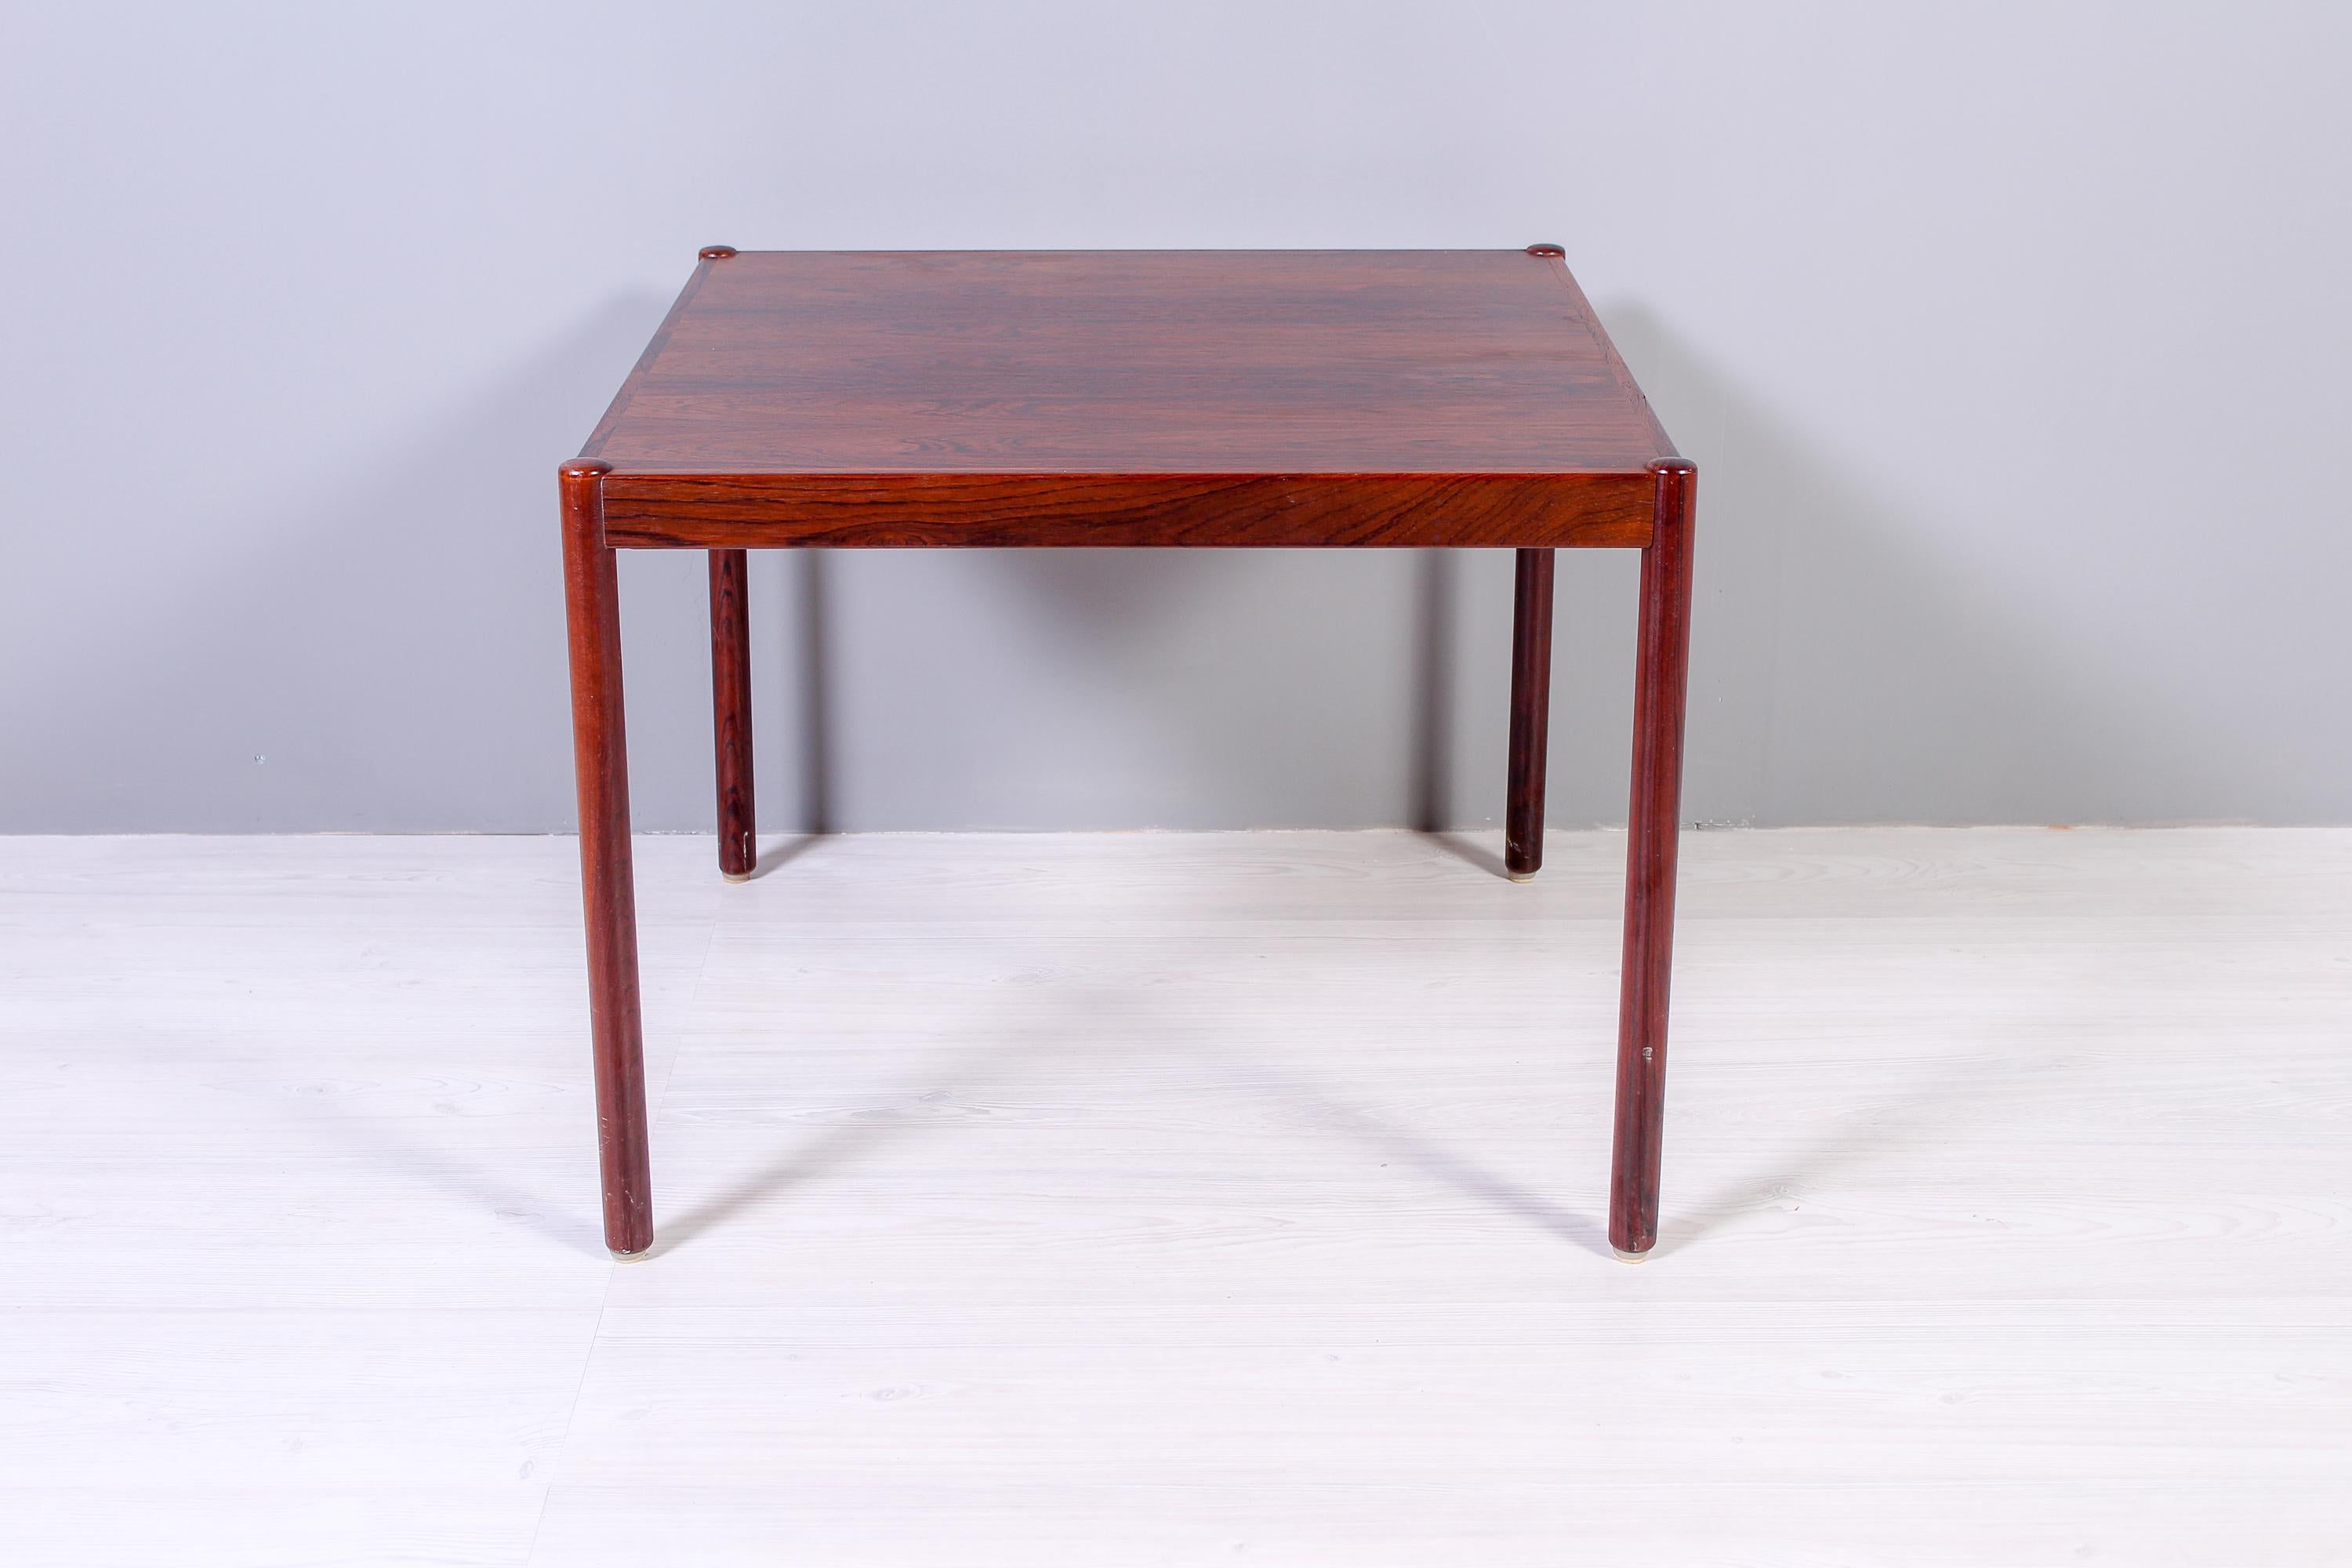 A minimalistic rosewood coffee table made in Scandinavia during the 1950s. Very good vintage condition with minor signs of usage.